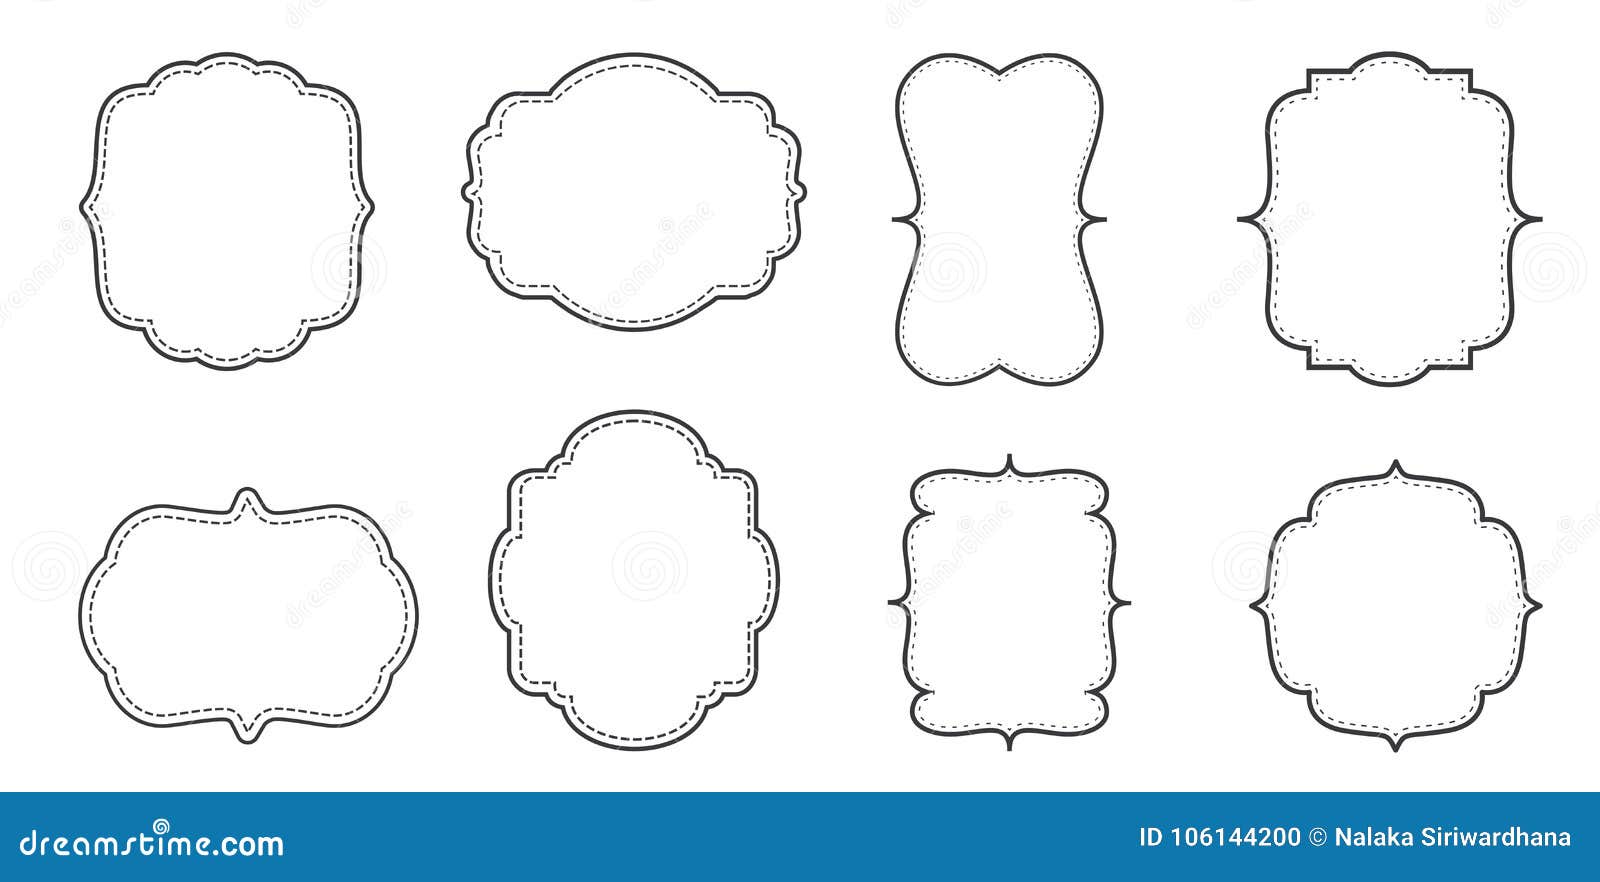 Download Fancy Page Border set. stock vector. Illustration of page ...